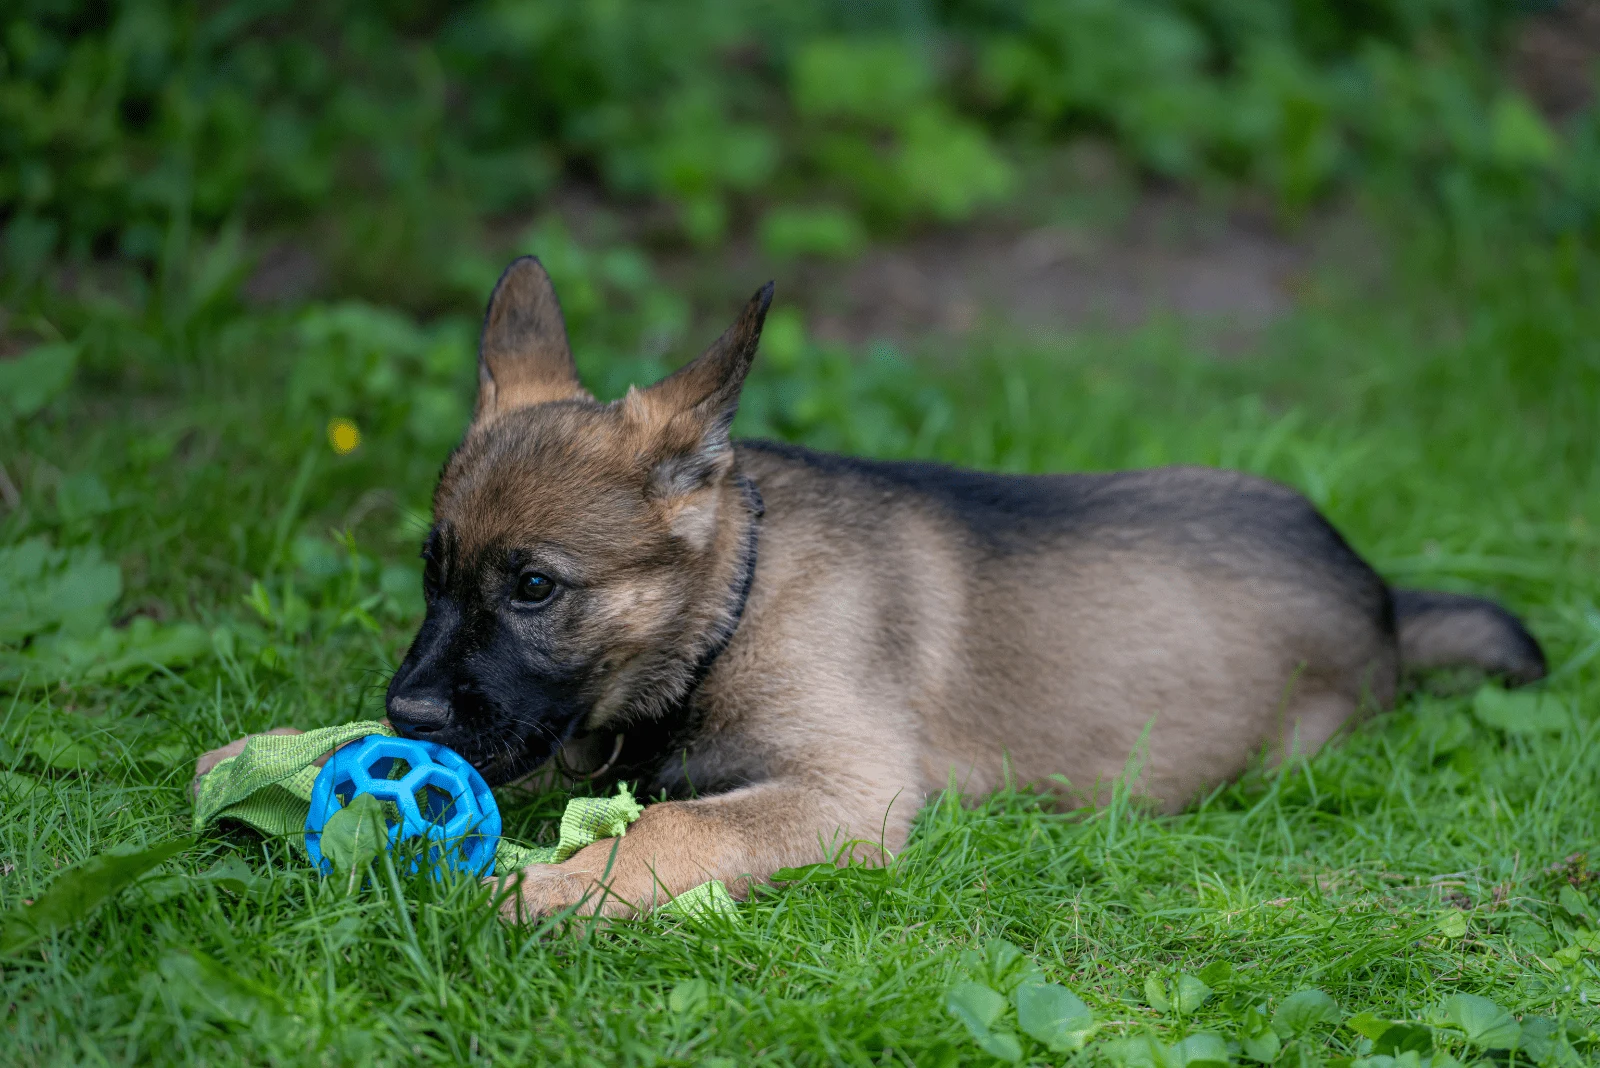 German Shepherd Puppy is lying on the grass and playing with a toy